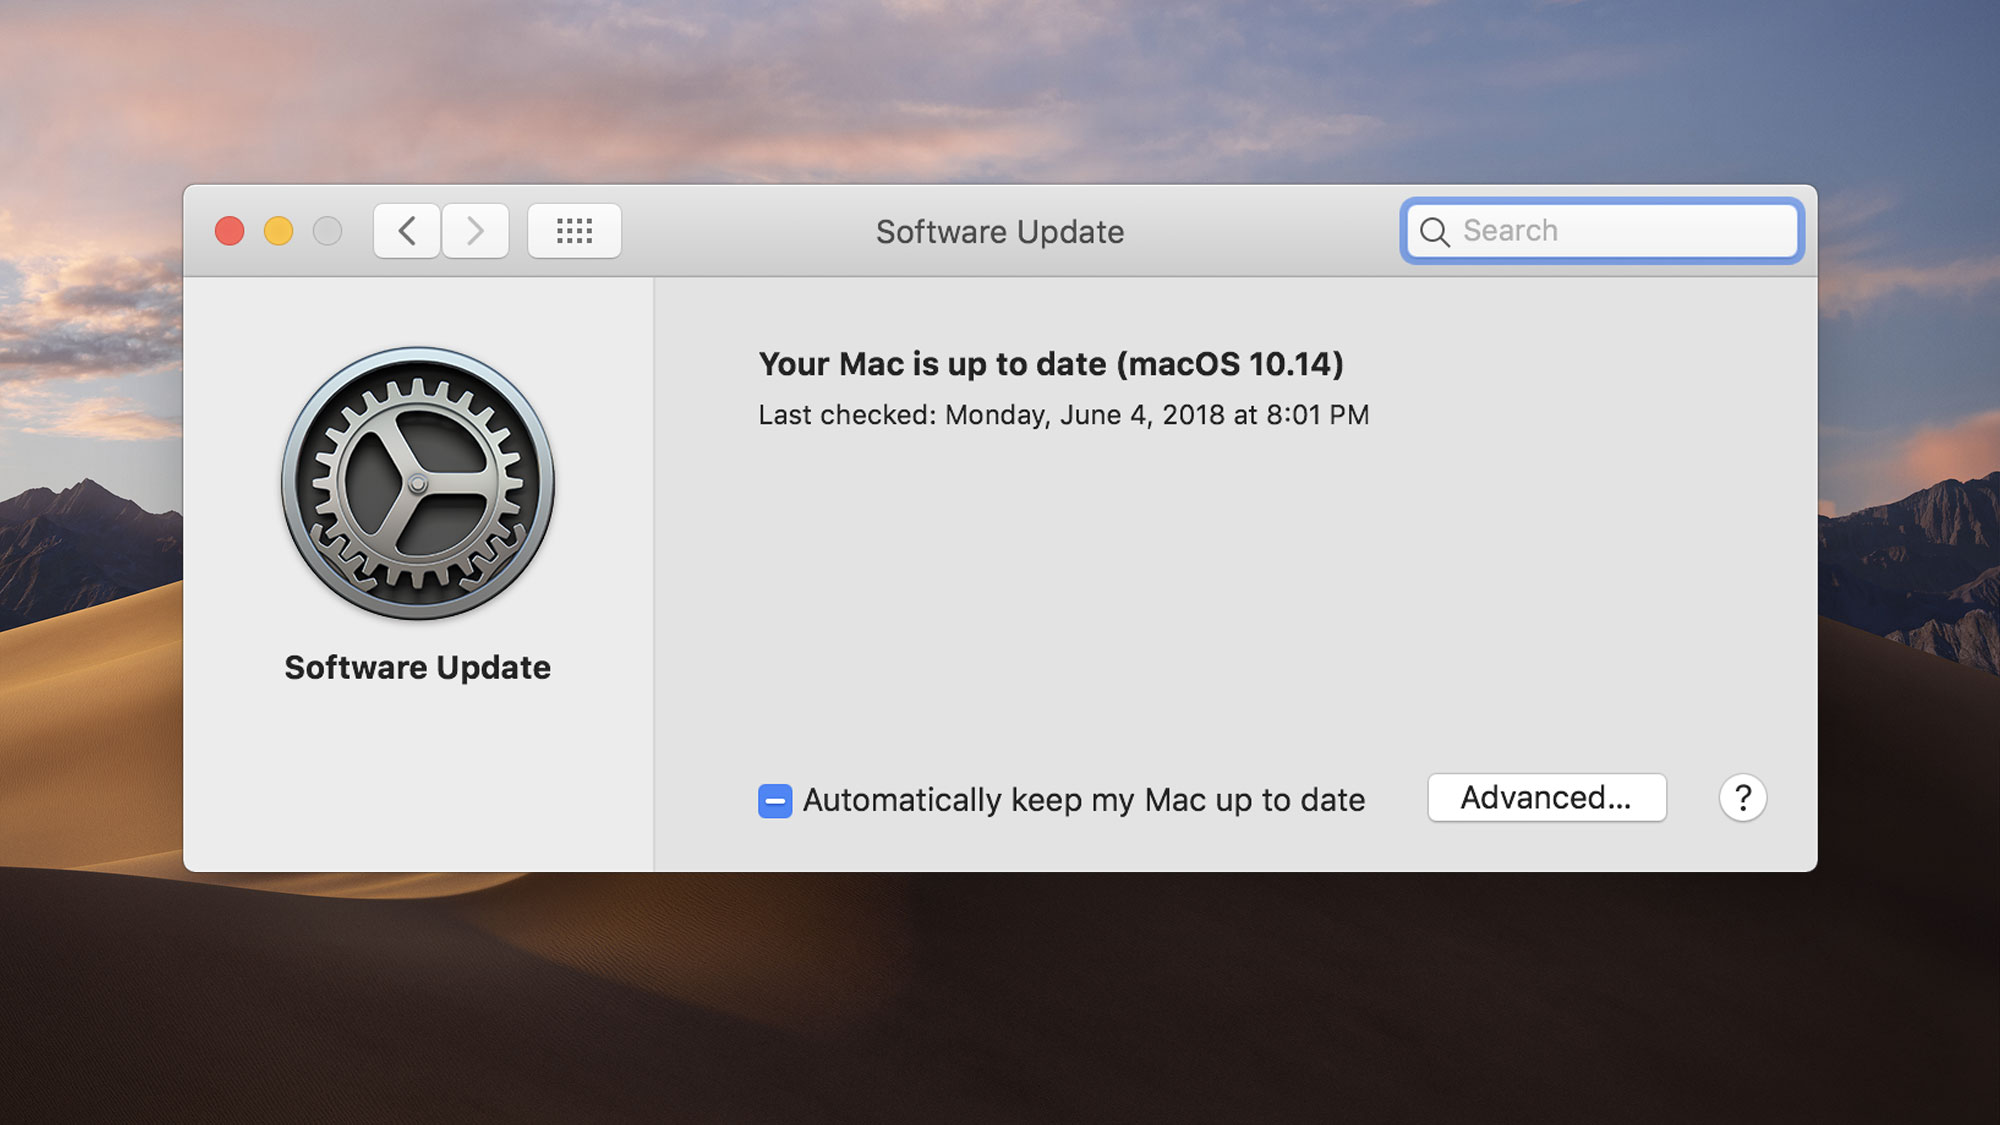 Software Update Mac 10.13 Or Later